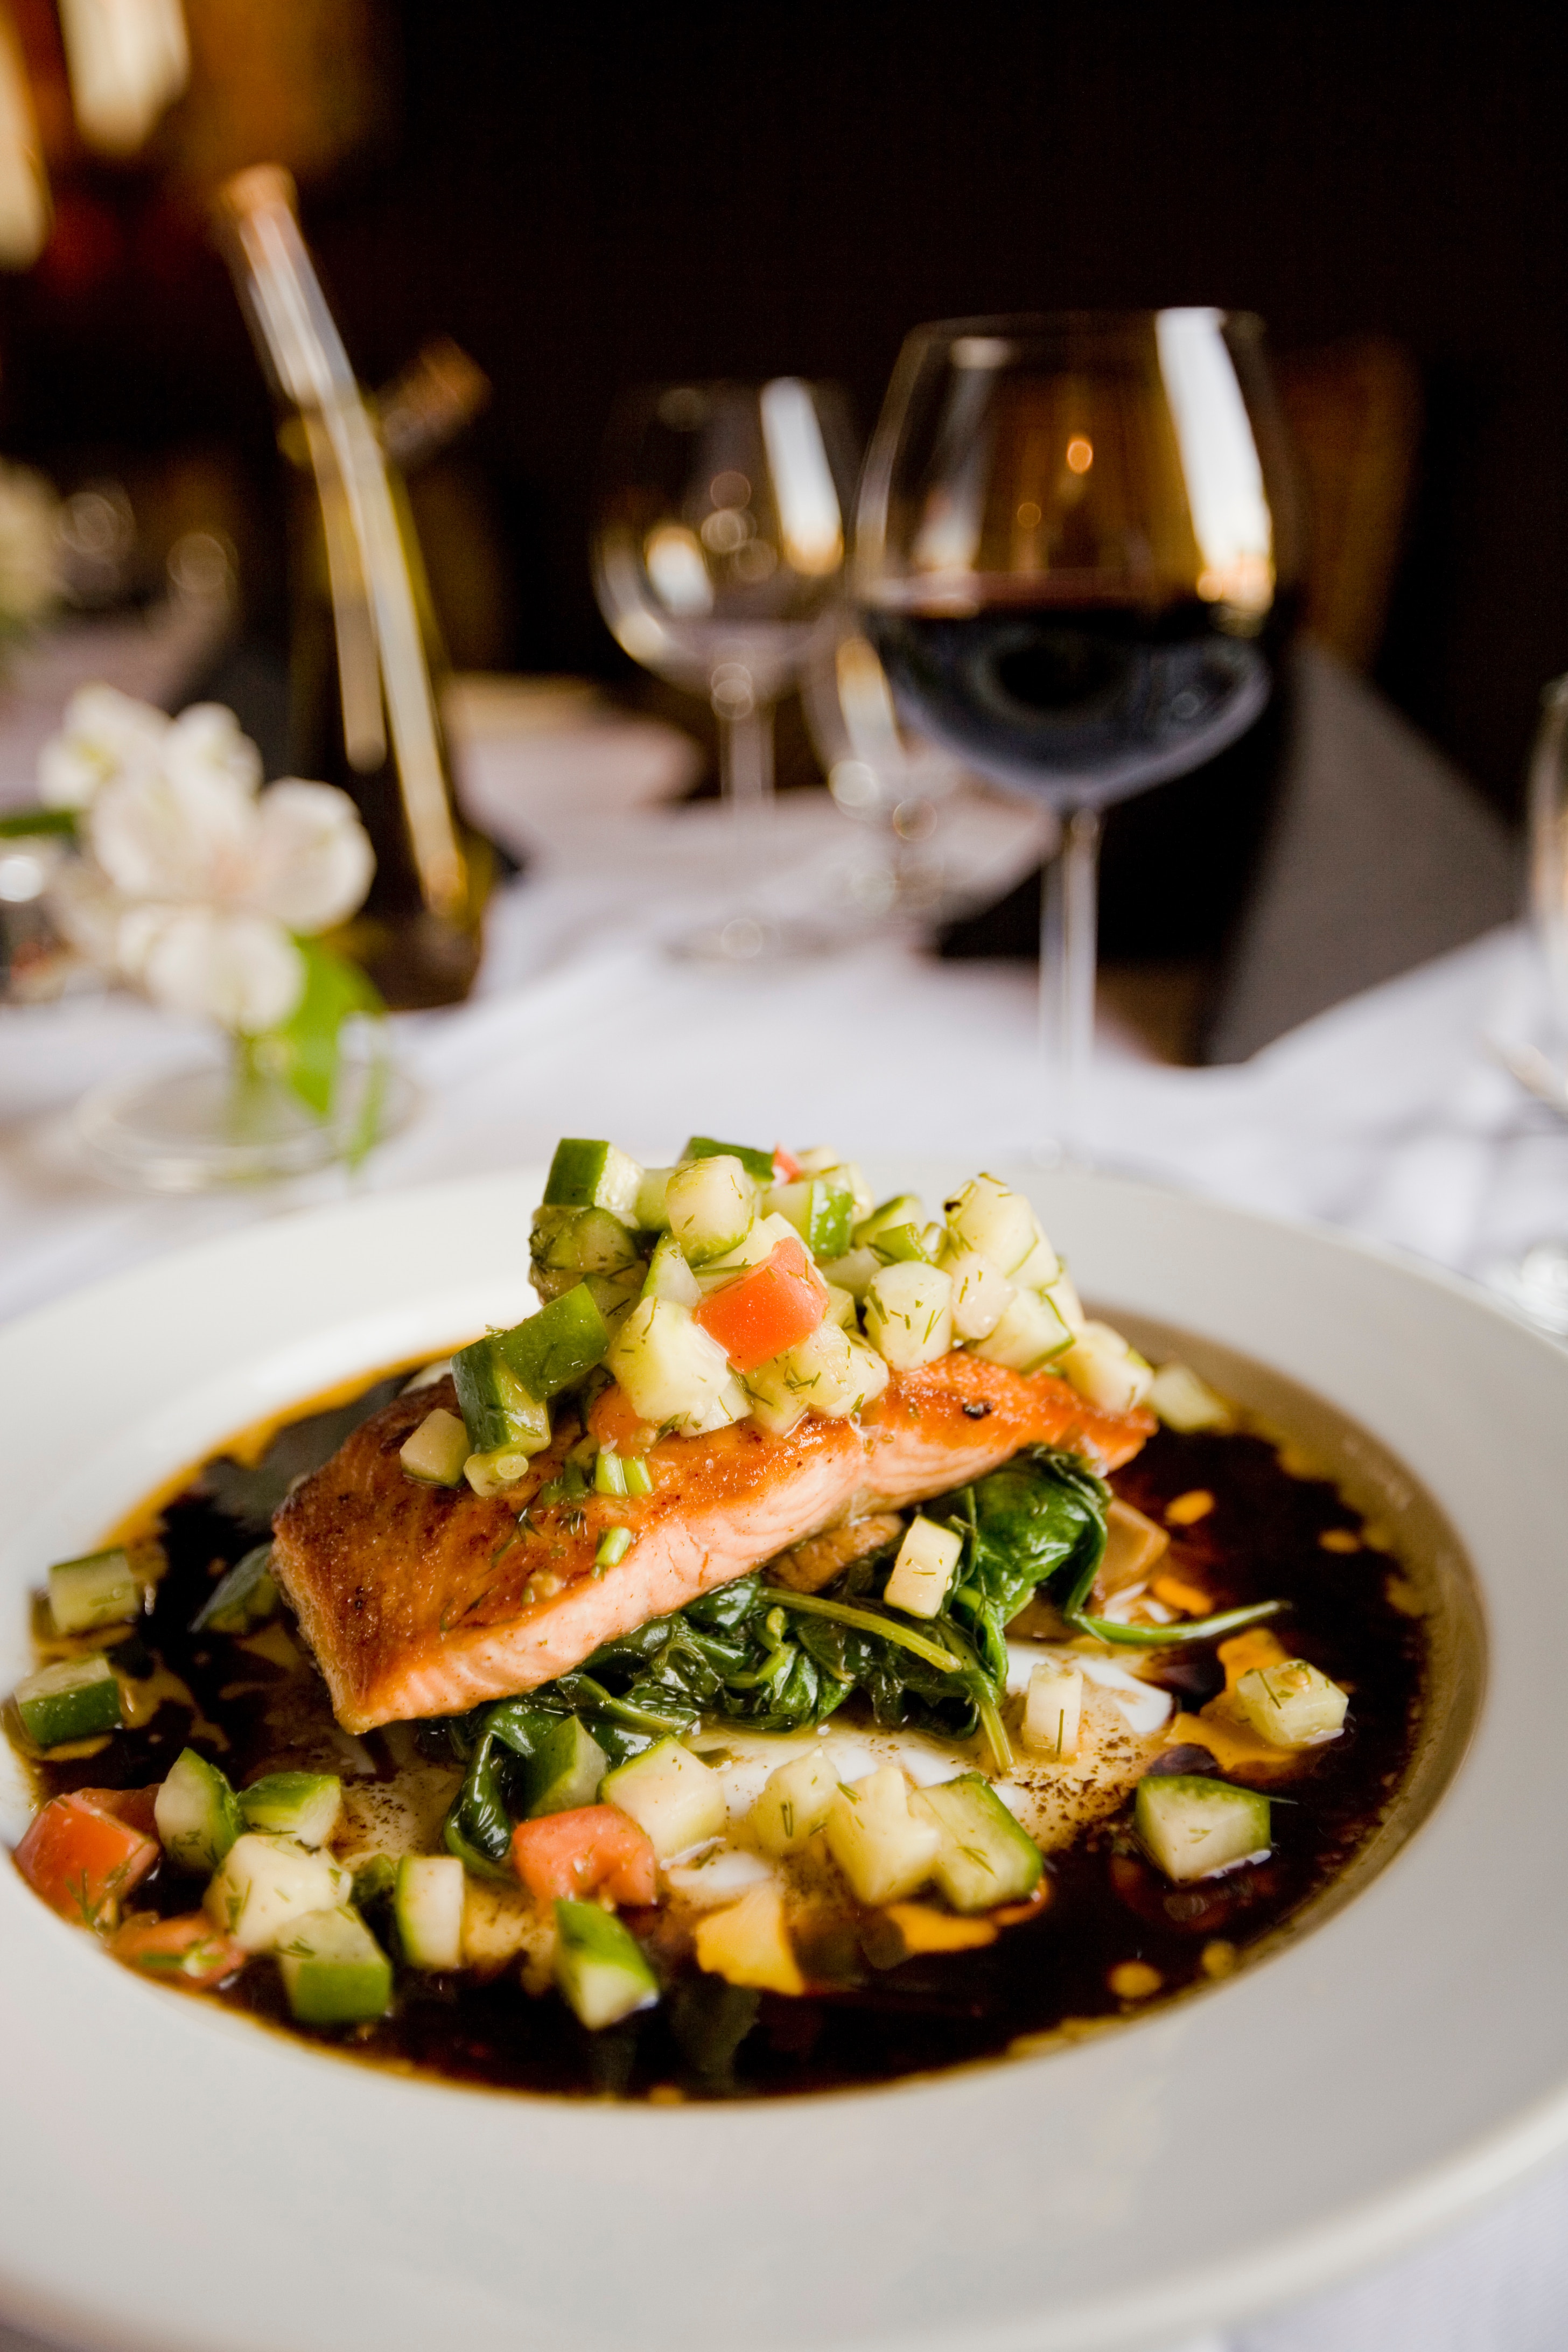 Shallow white bowl with cooked salmon on mound of cubed vegetables in brown broth, glass of red wine, bottle behind